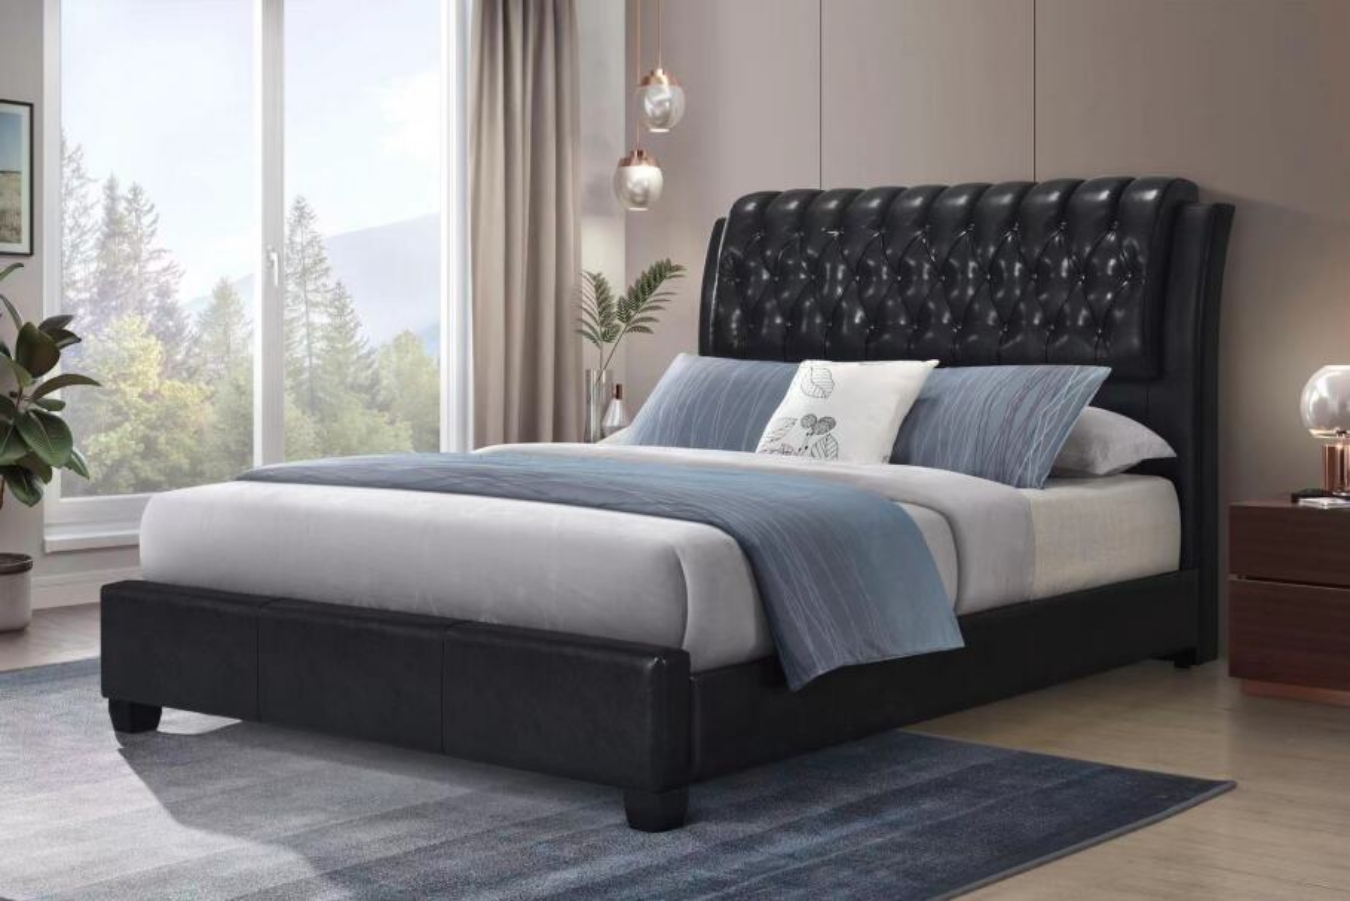 THOMSON BLACK DOUBLE LEATHER BED - Simply stunning with button tufting and wing detail. 